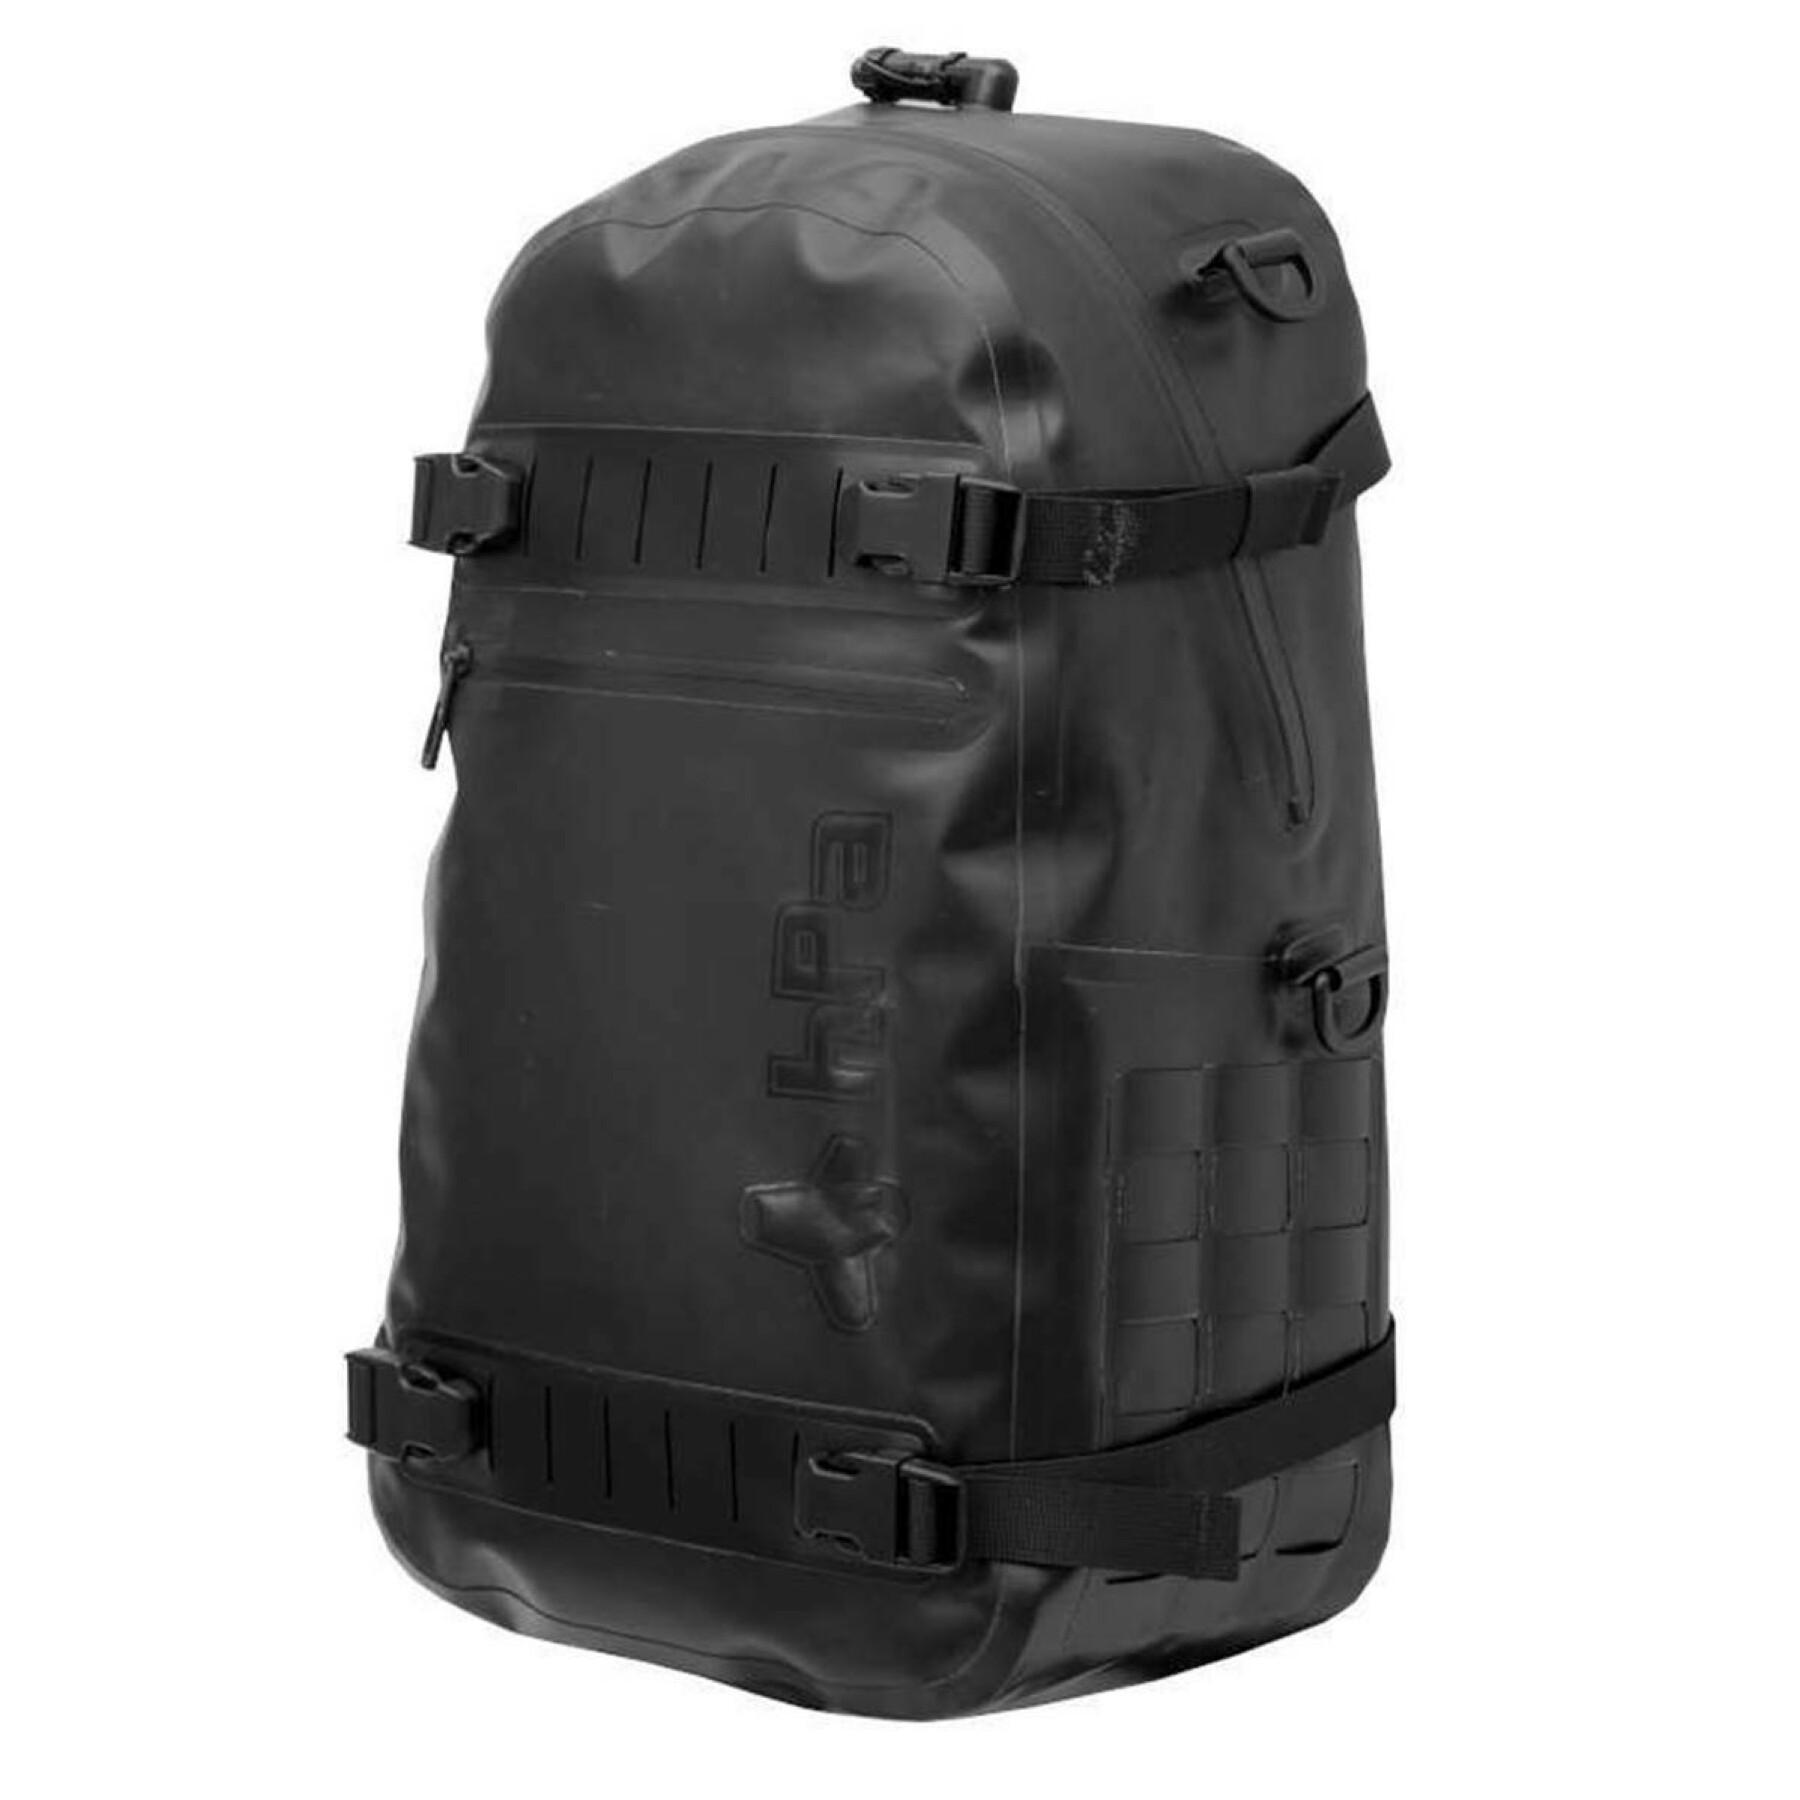 Waterproof and inflatable backpack Hpa infladry 25B